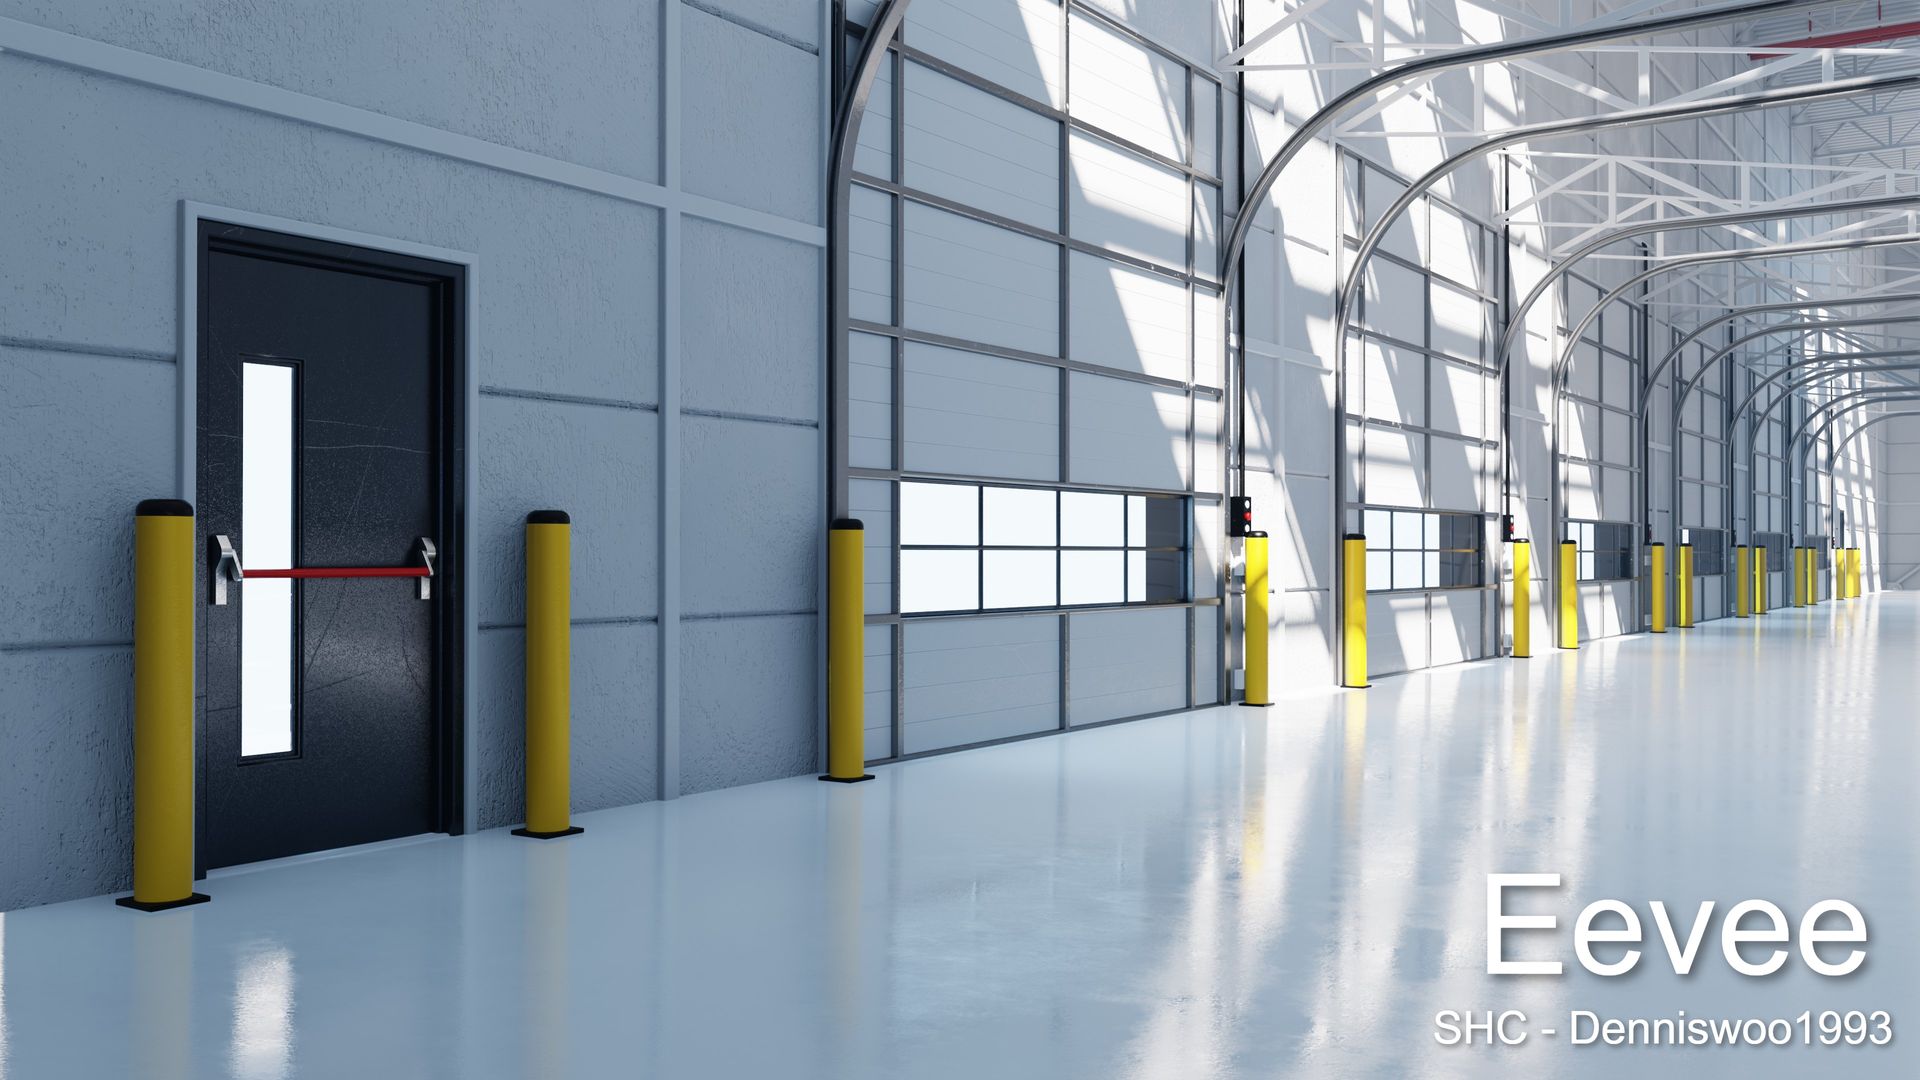 Blender Market on Twitter: "This is a large modern warehouse for Blender Eevee and cycles. (interior only) in the scene originally designed and modeled. The entire building is developed